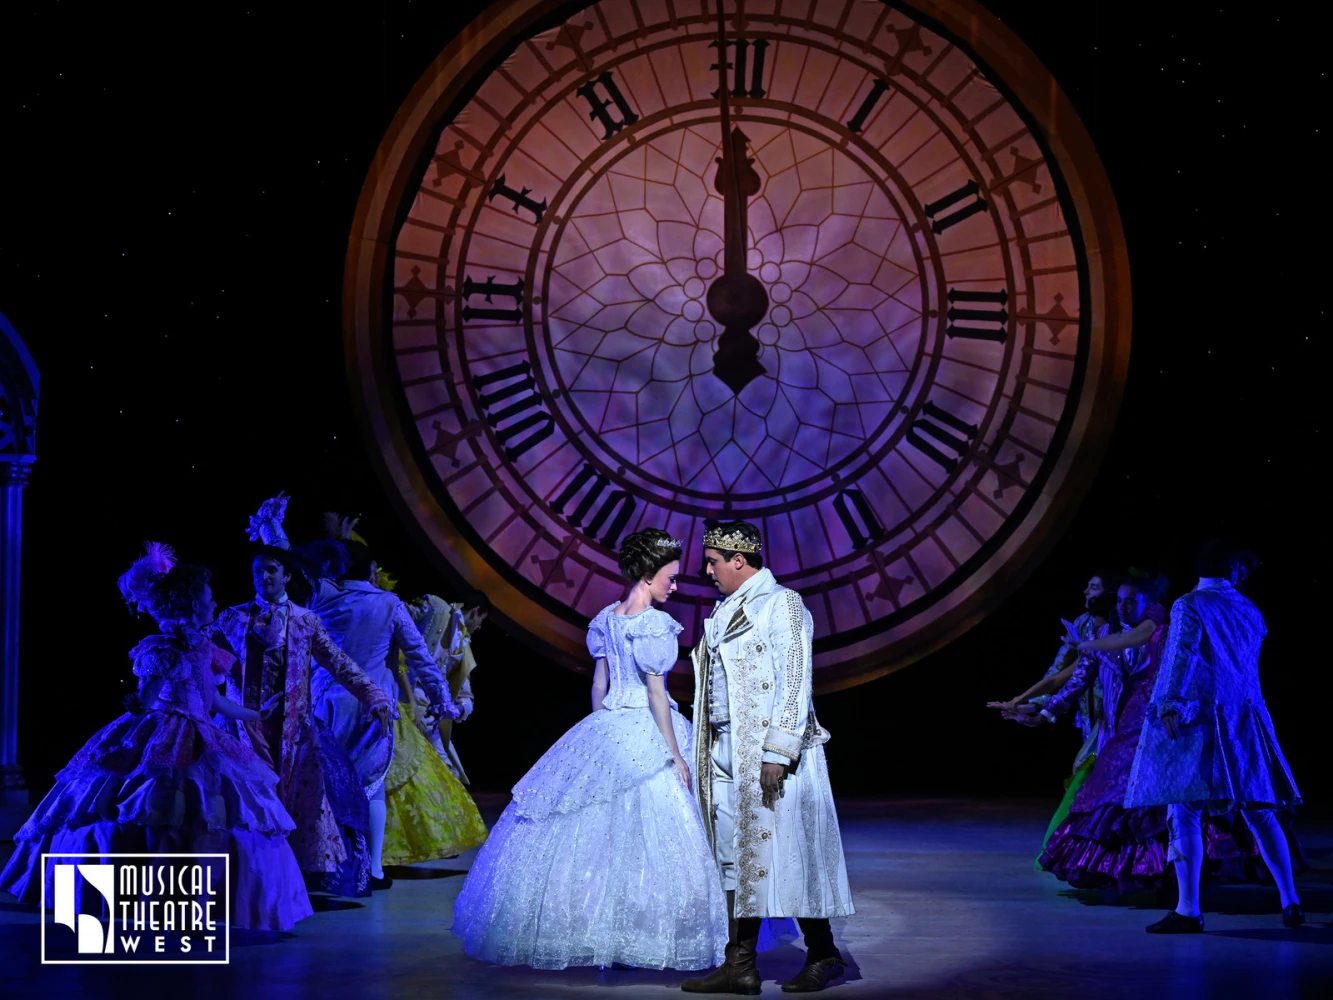 Rodgers + Hammerstein's Cinderella: What to expect - 4